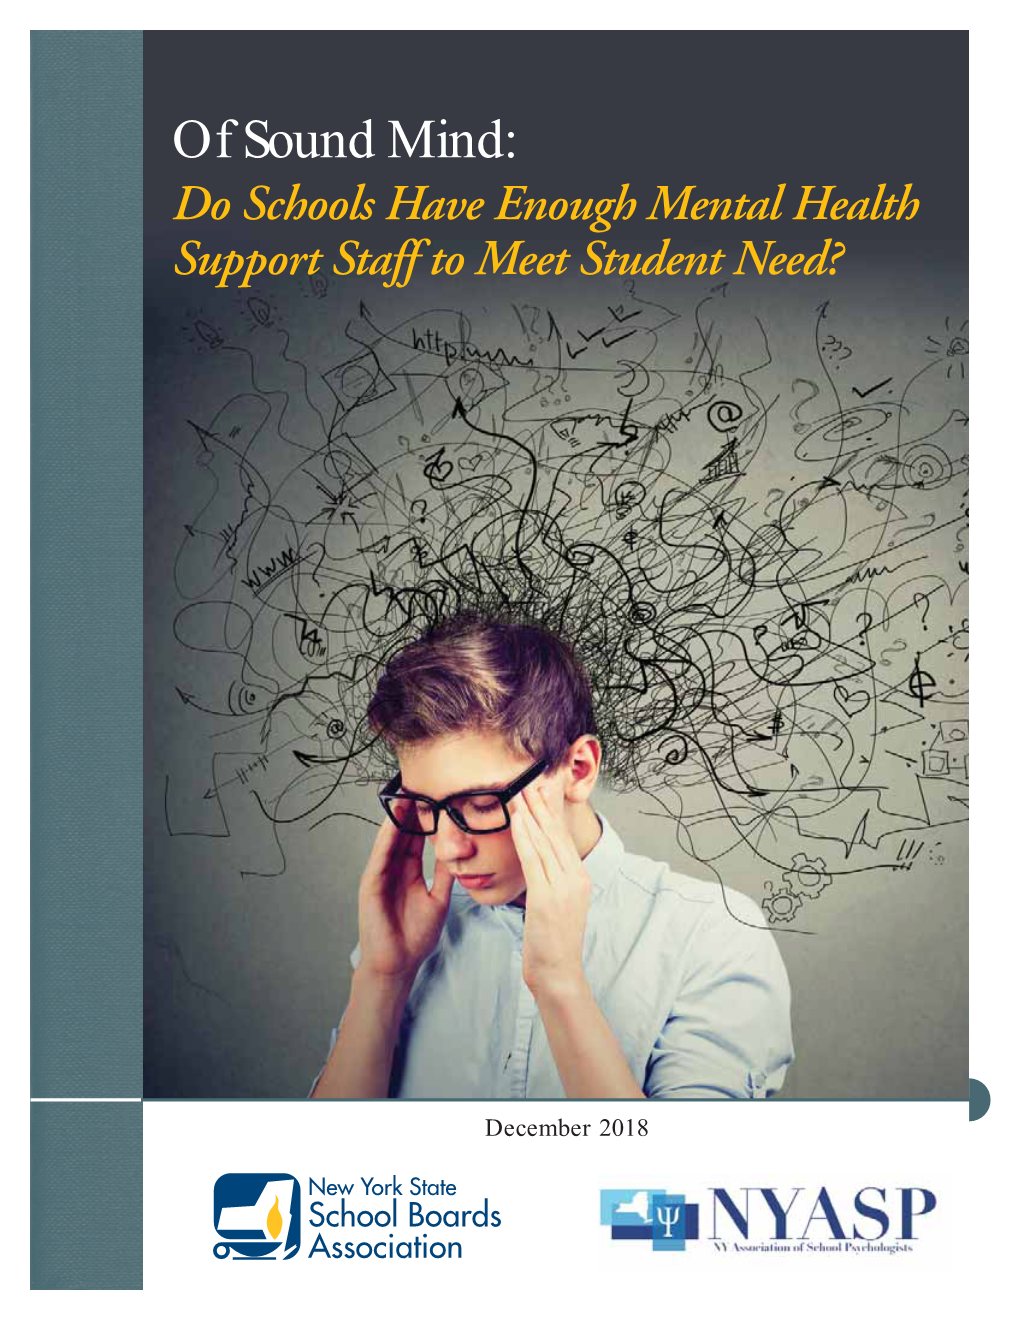 Of Sound Mind: Do Schools Have Enough Mental Health Support Staff to Meet Student Need?